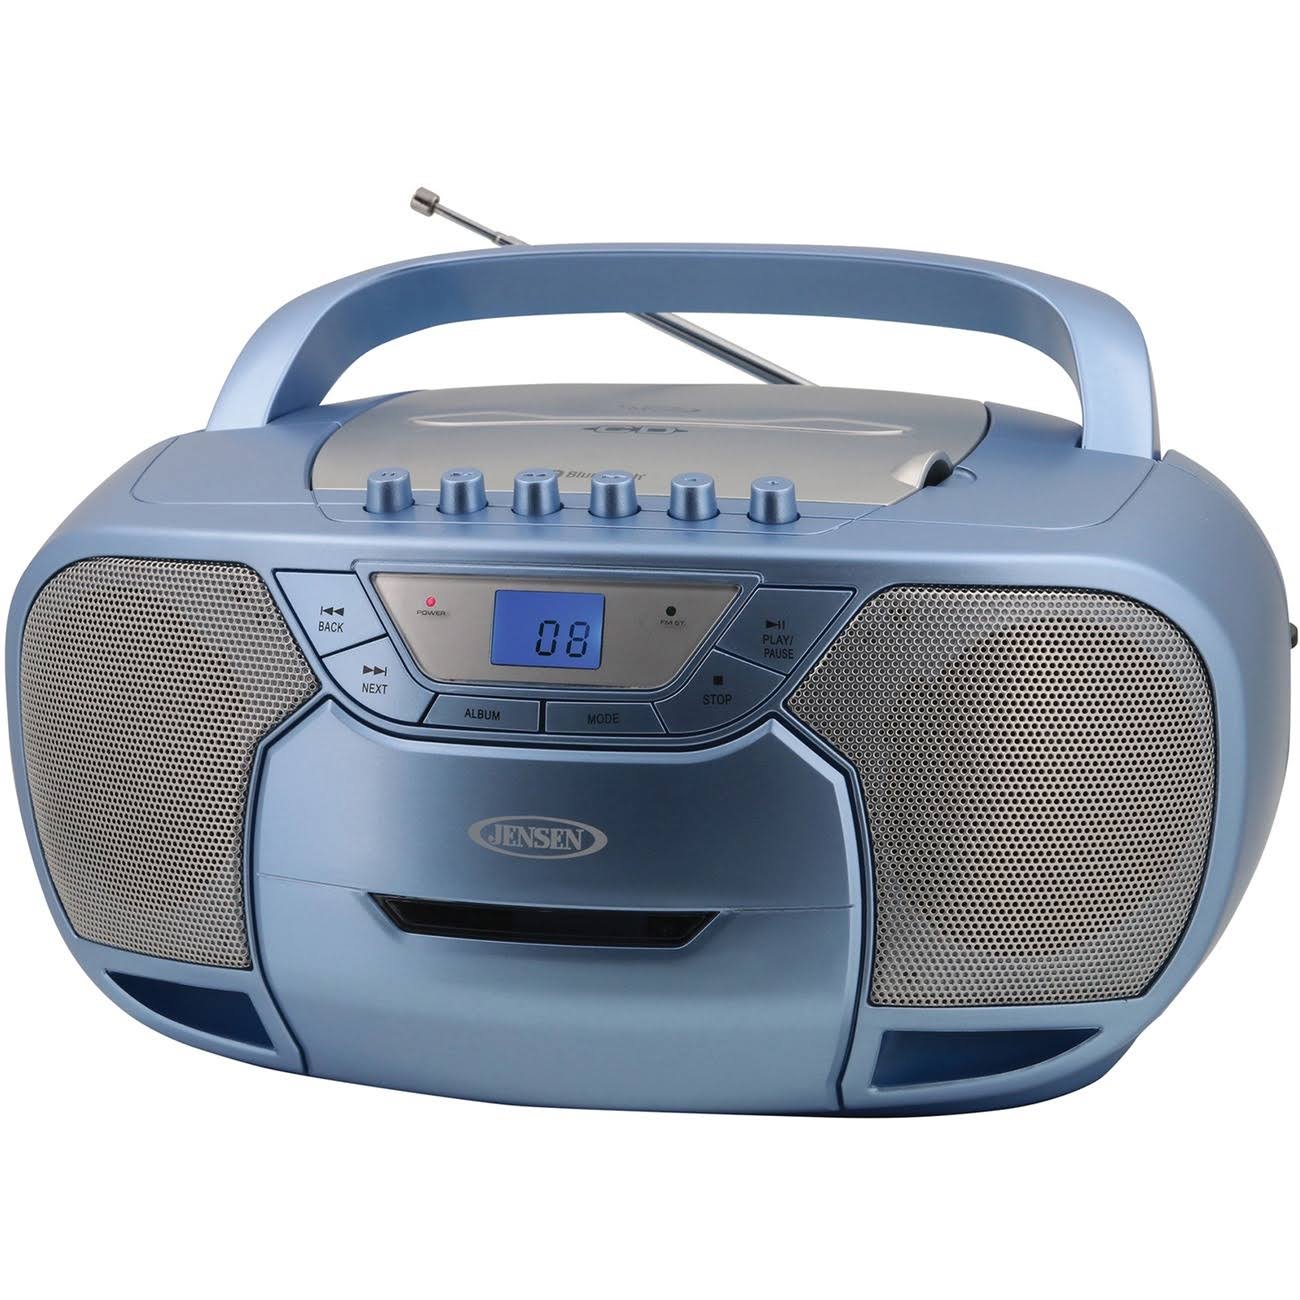 Jensen Cd-590-bl Portable Bluetooth Stereo MP3 CD Cassette Player/Recorder with AM/FM Radio